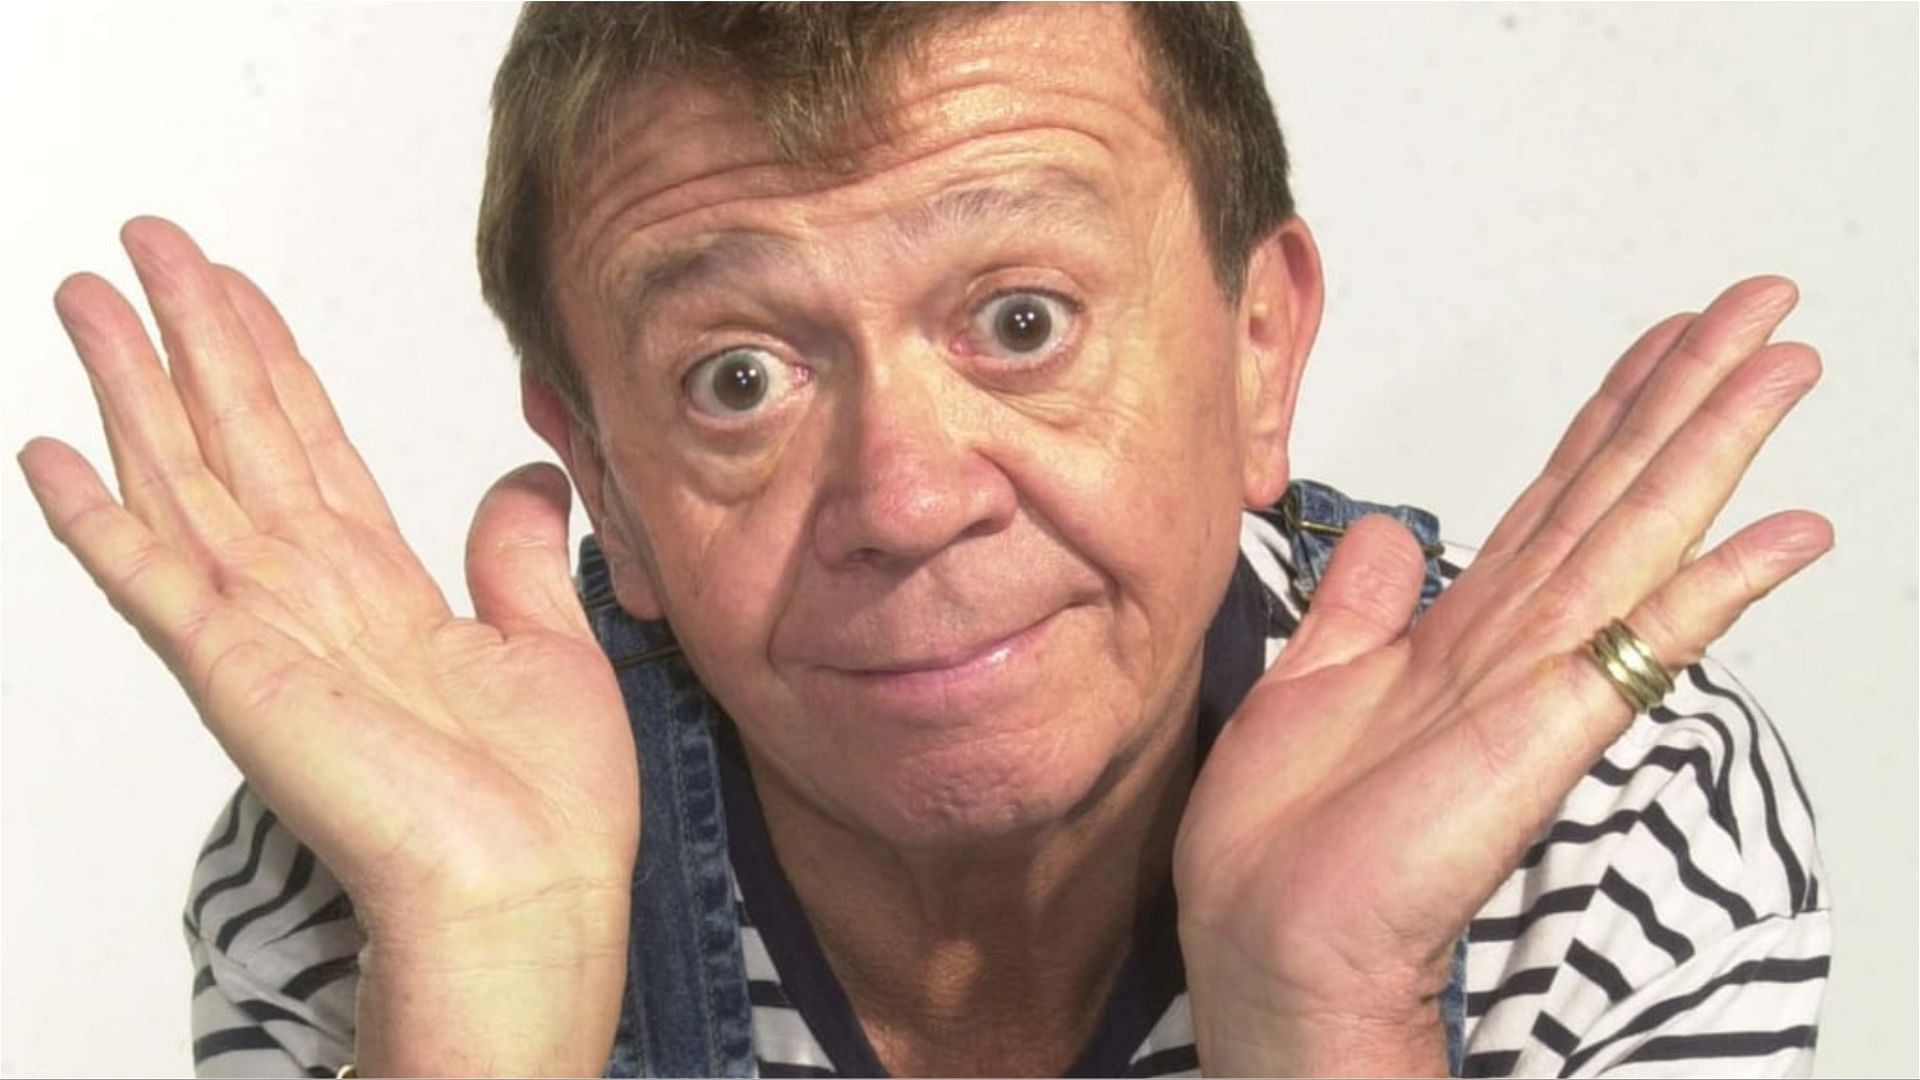 Chabelo recently died at the age of 88 (Image via NFTDEFILAND/Twitter)